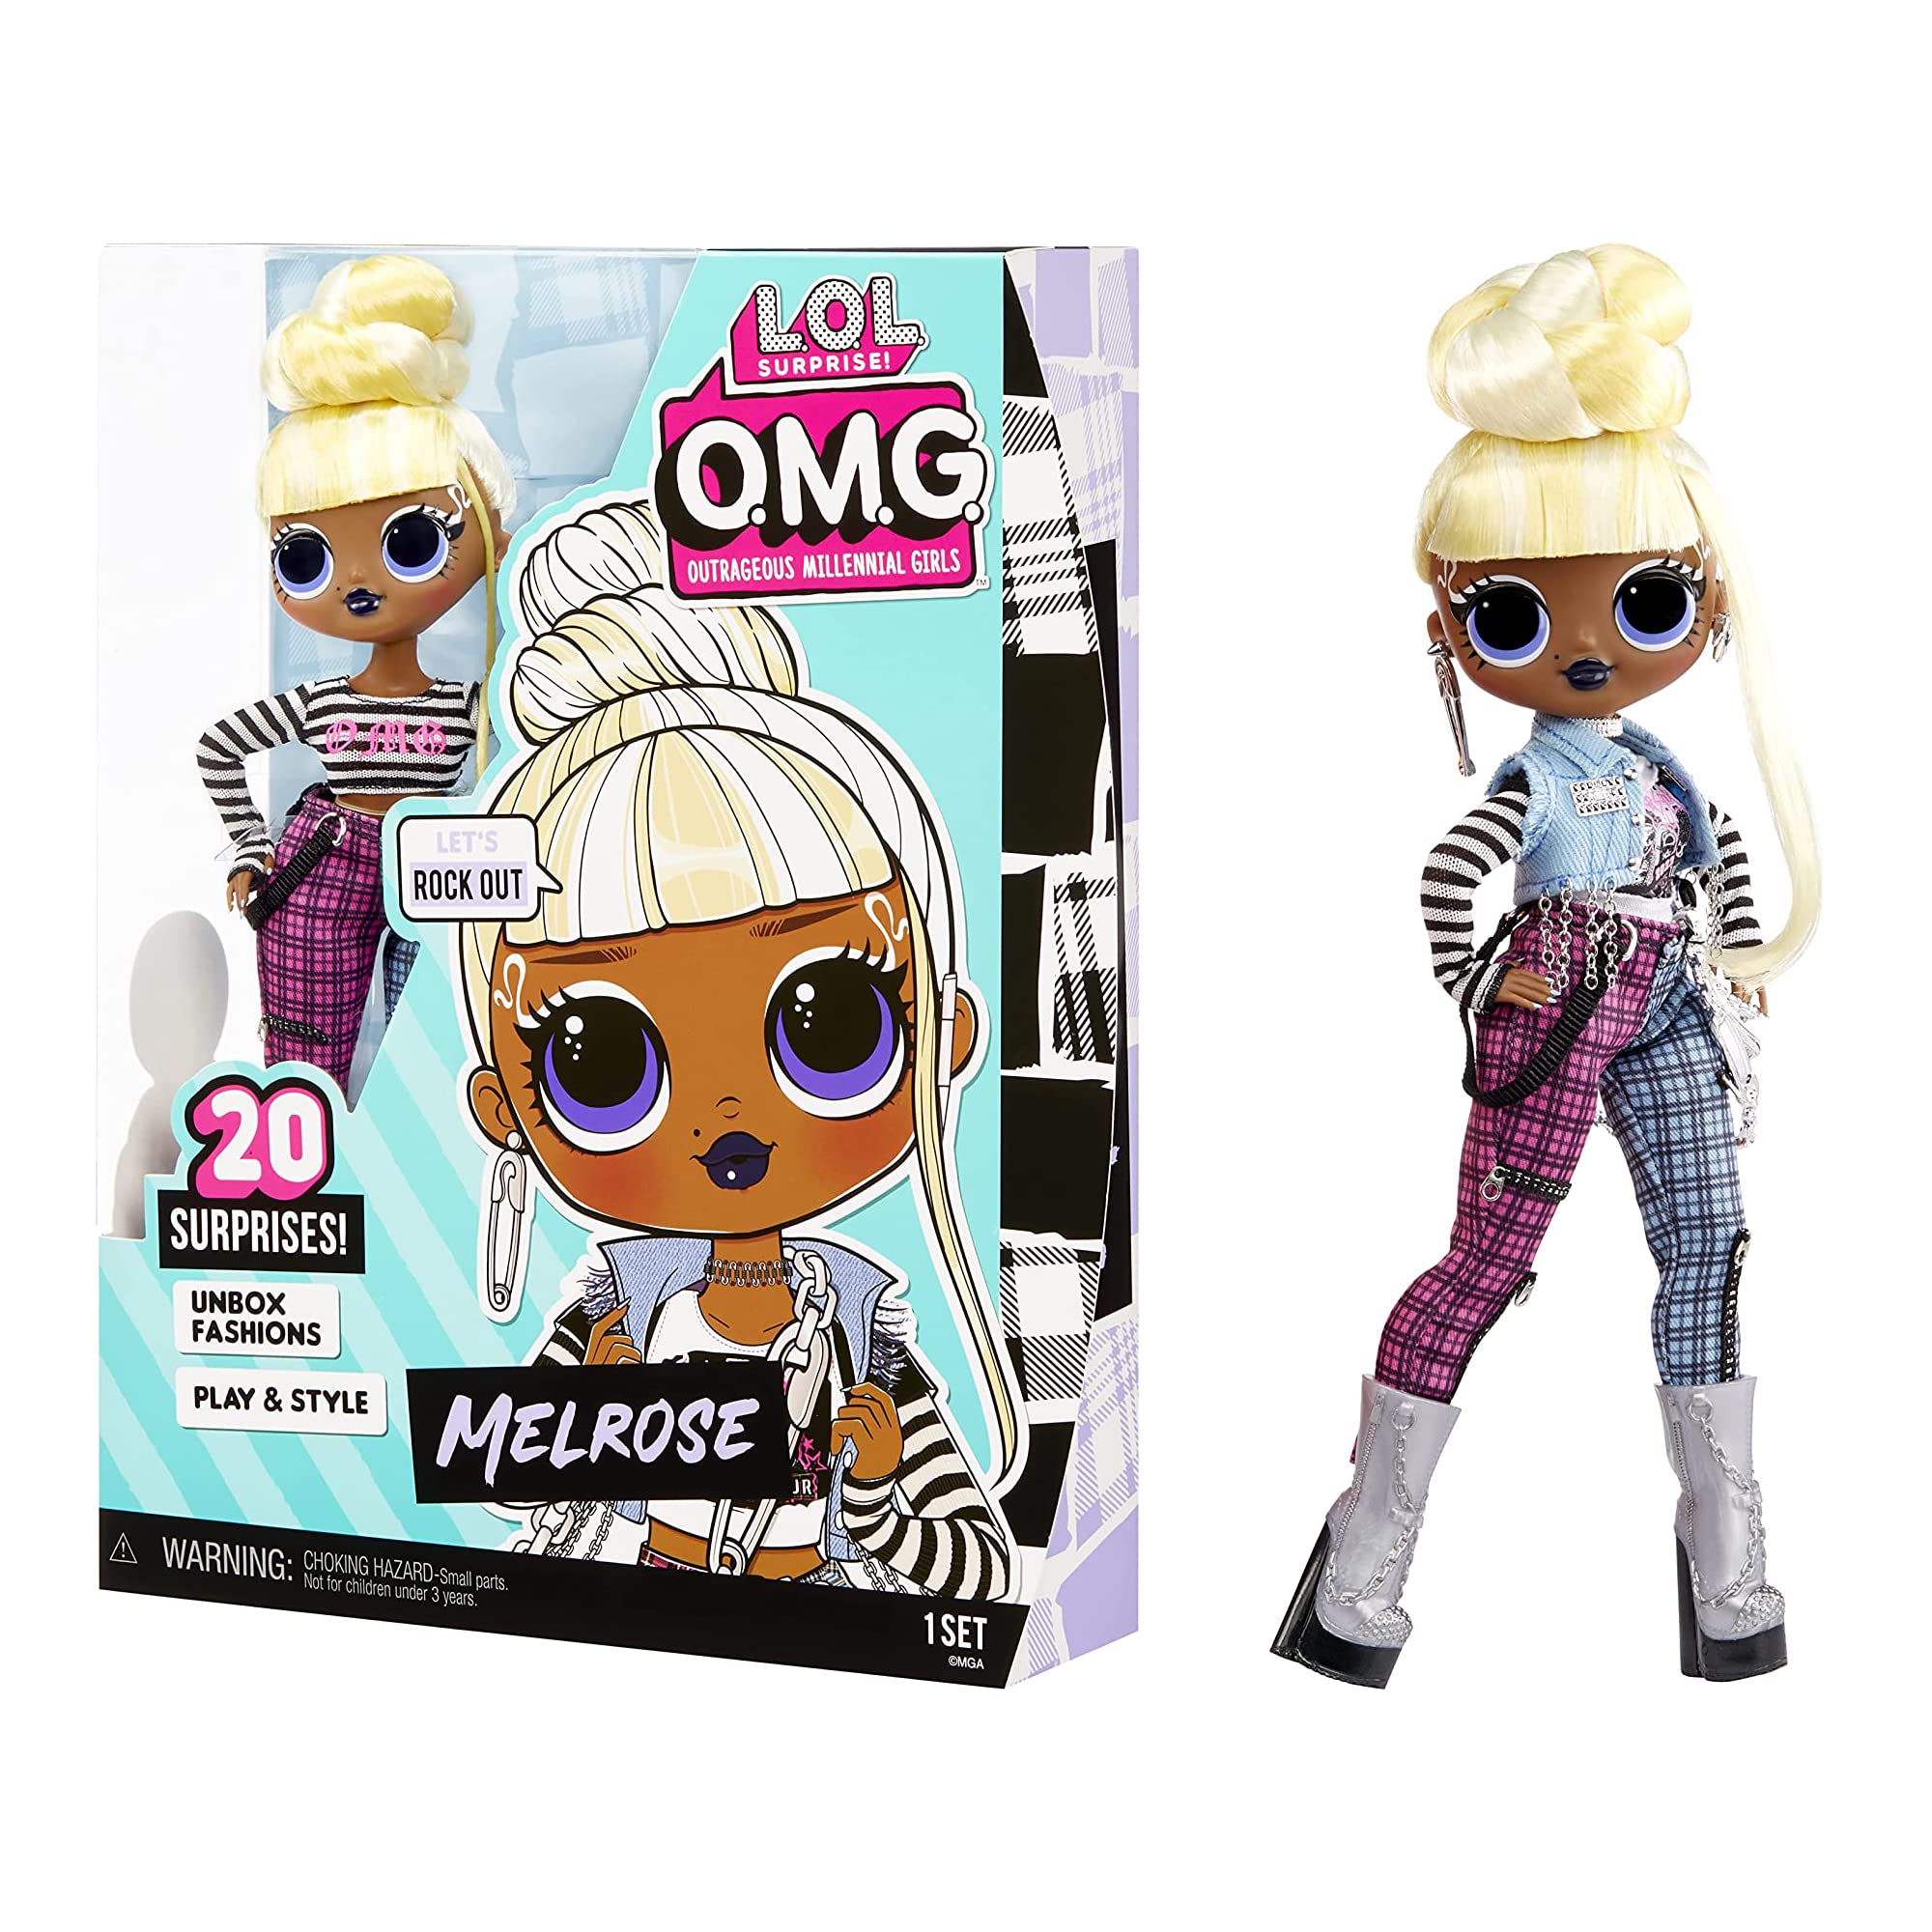 LOL Surprise OMG Melrose Fashion Doll with 20 Surprises Including Accessories in Stylish Outfit, Holiday Toy Great Gift for Kids Girls Boys Ages 4 5 6+ Years Old & Collec - $13.99